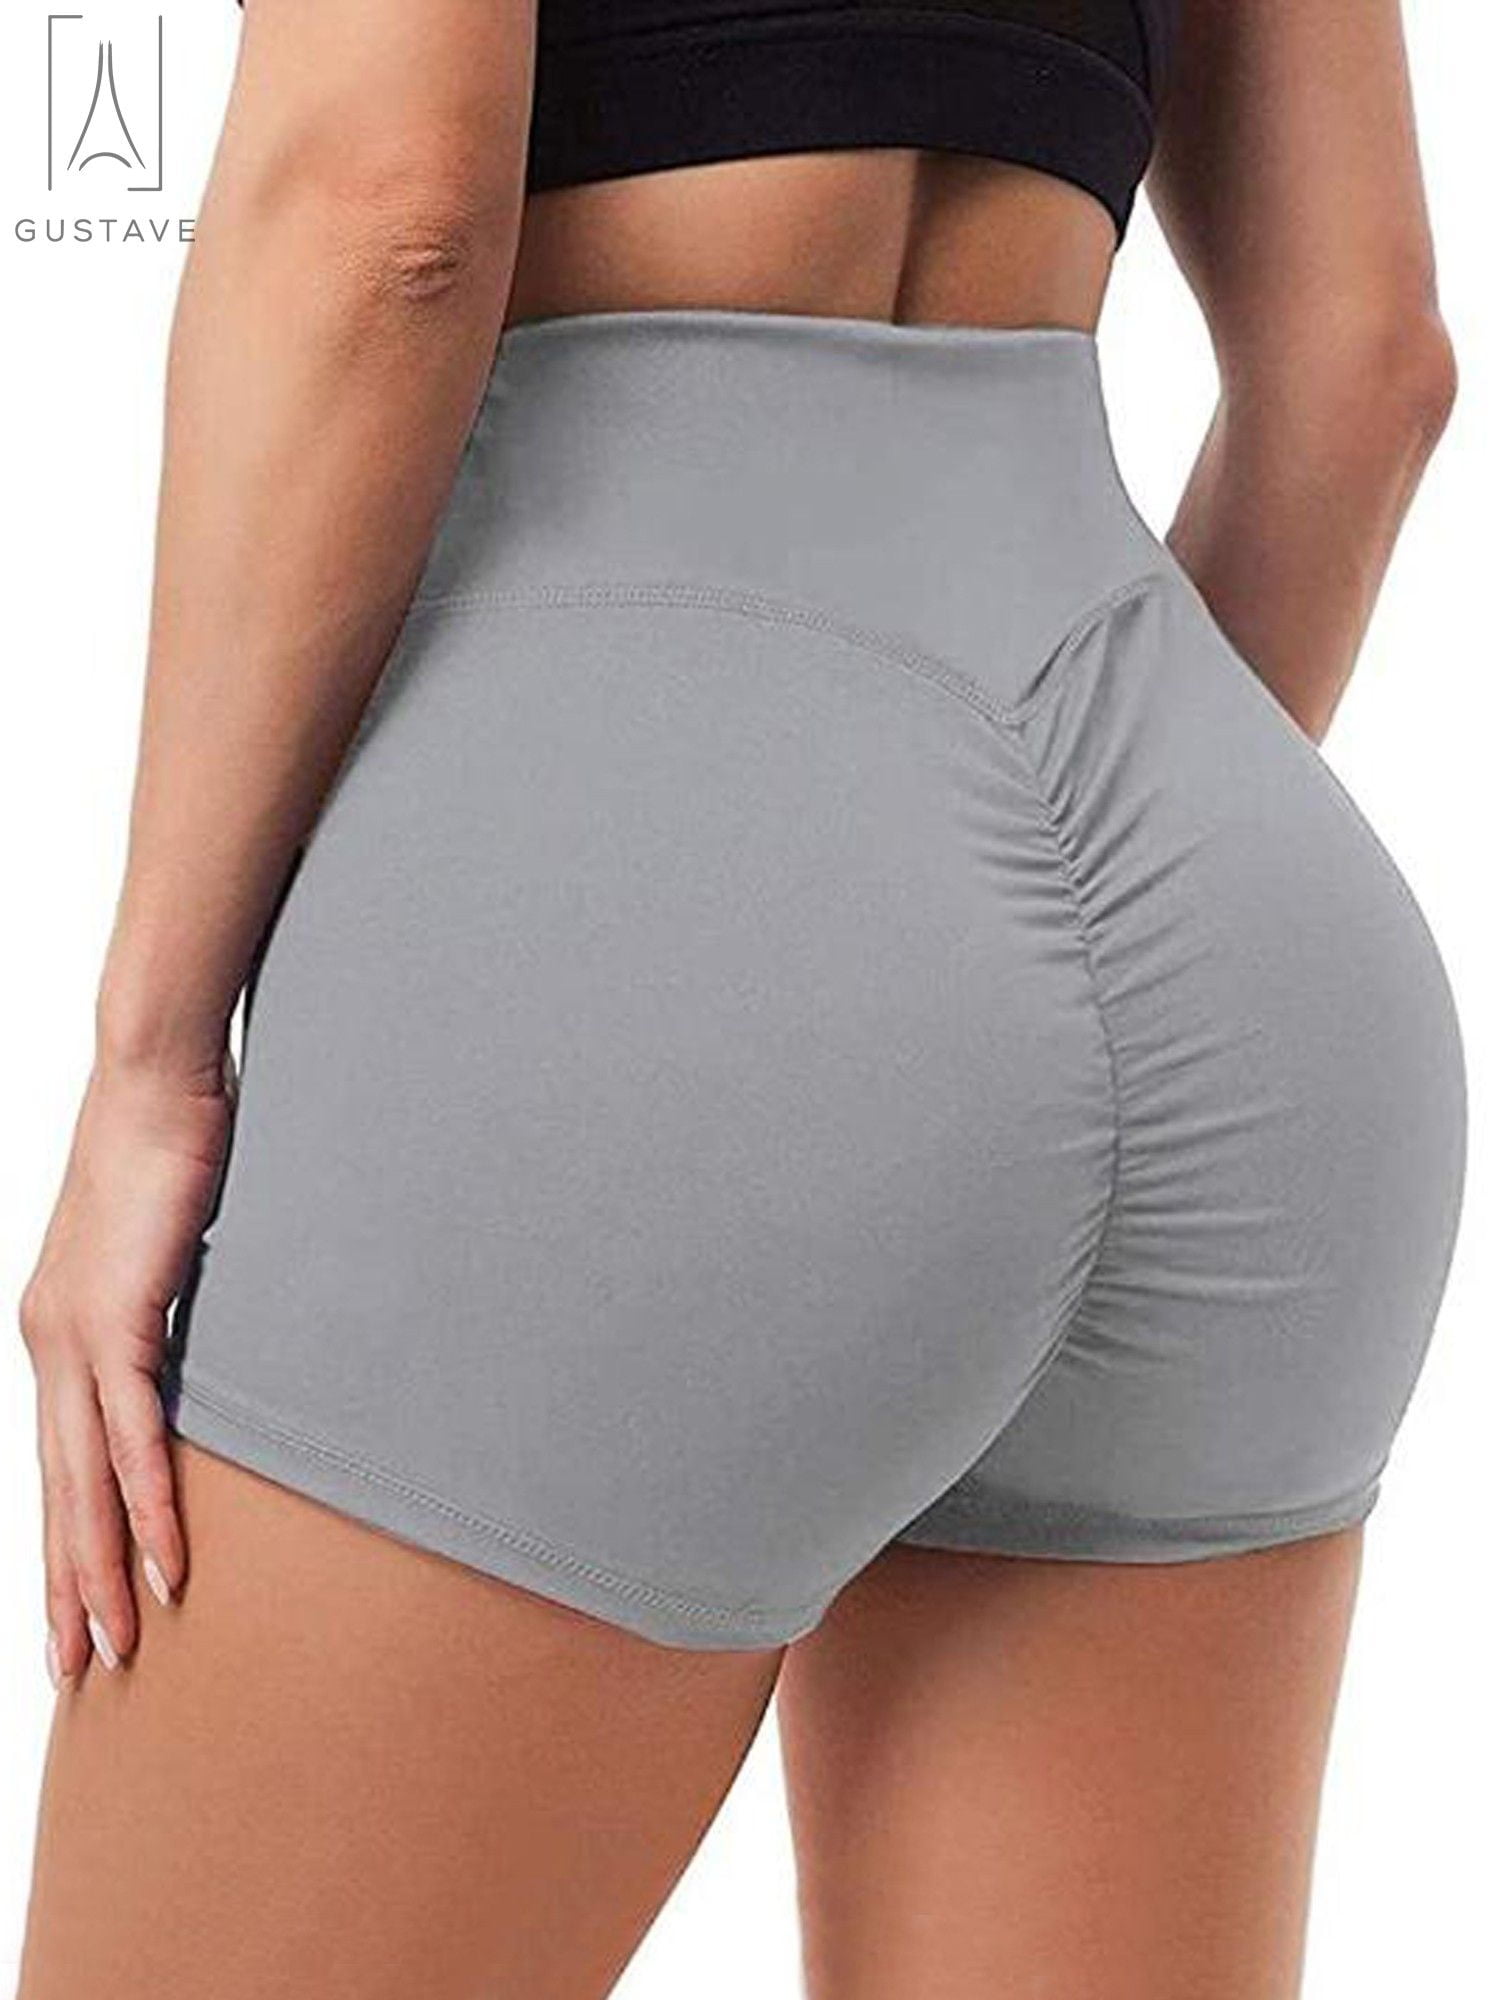 Womens Sports Yoga Shorts Push Up Ruched Gym Workout Fitness Casual Hot Pants 